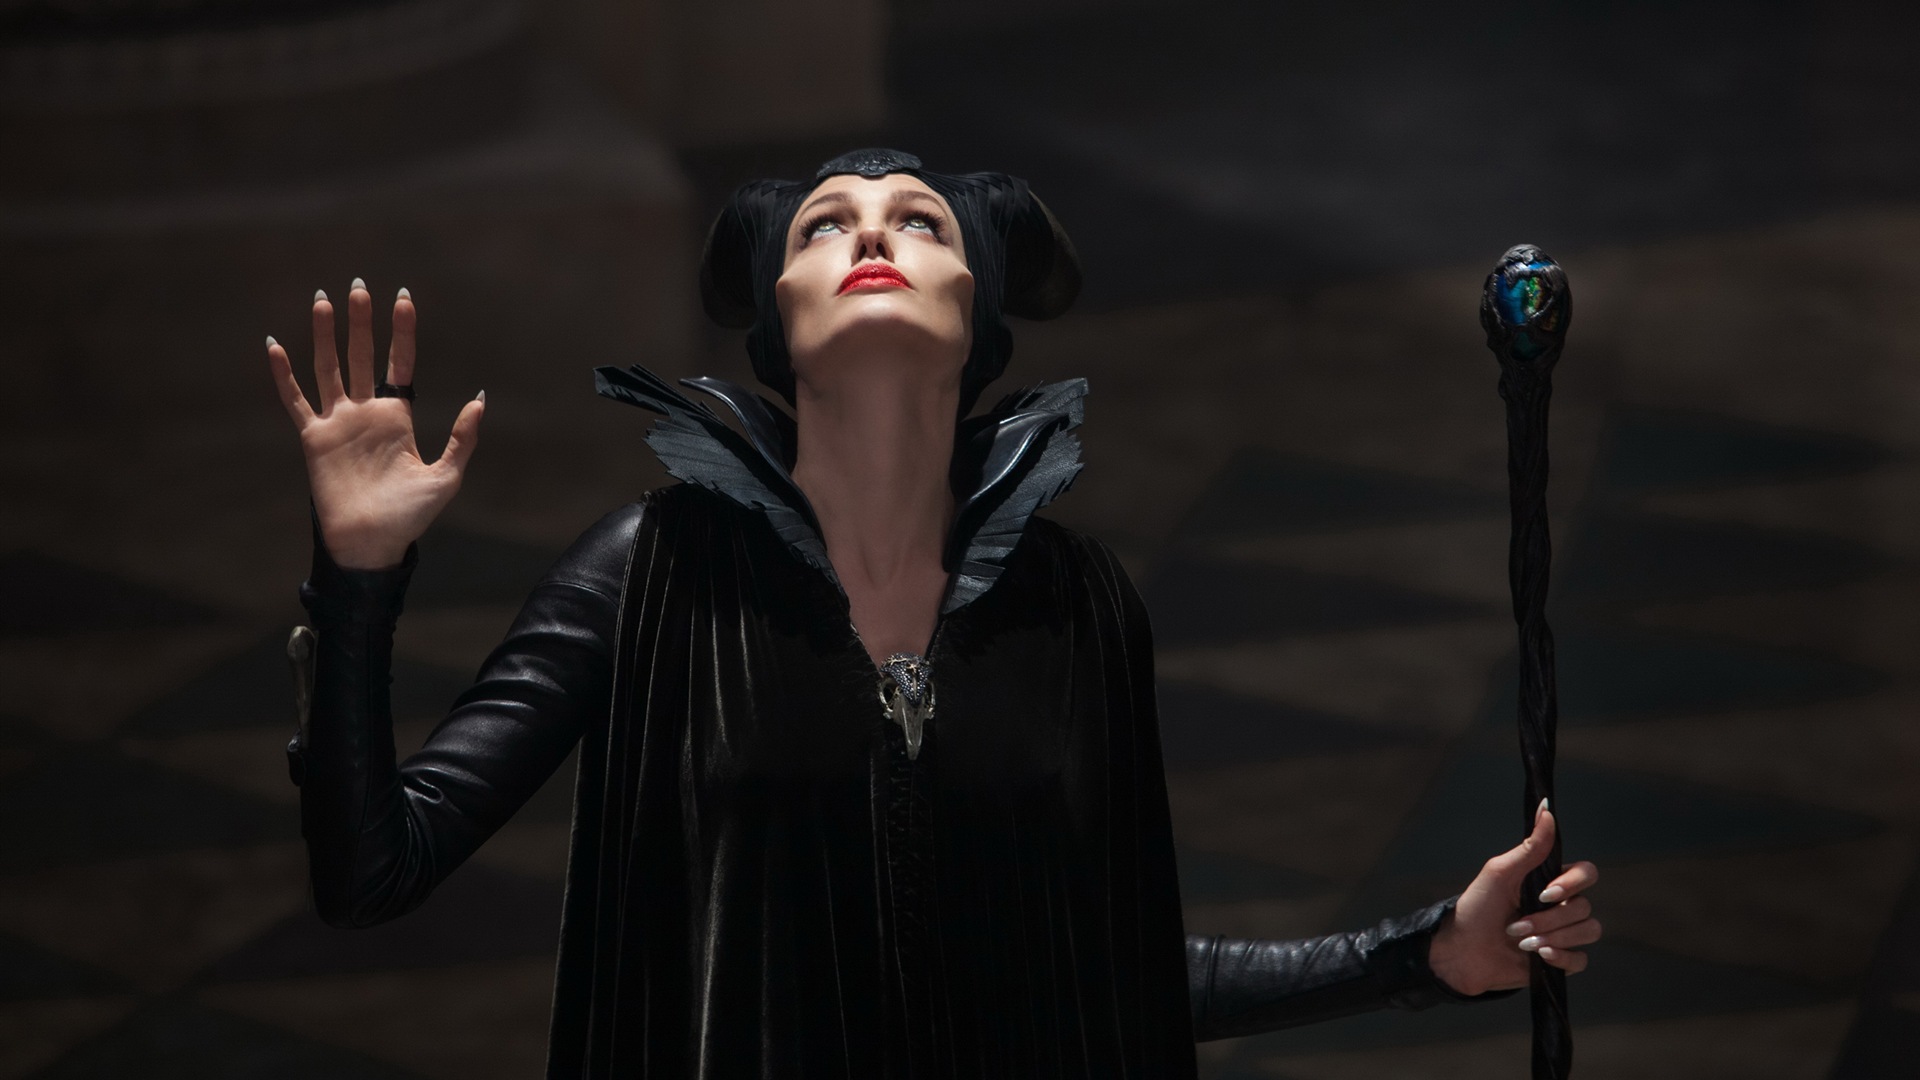 Maleficent 2014 HD movie wallpapers #4 - 1920x1080